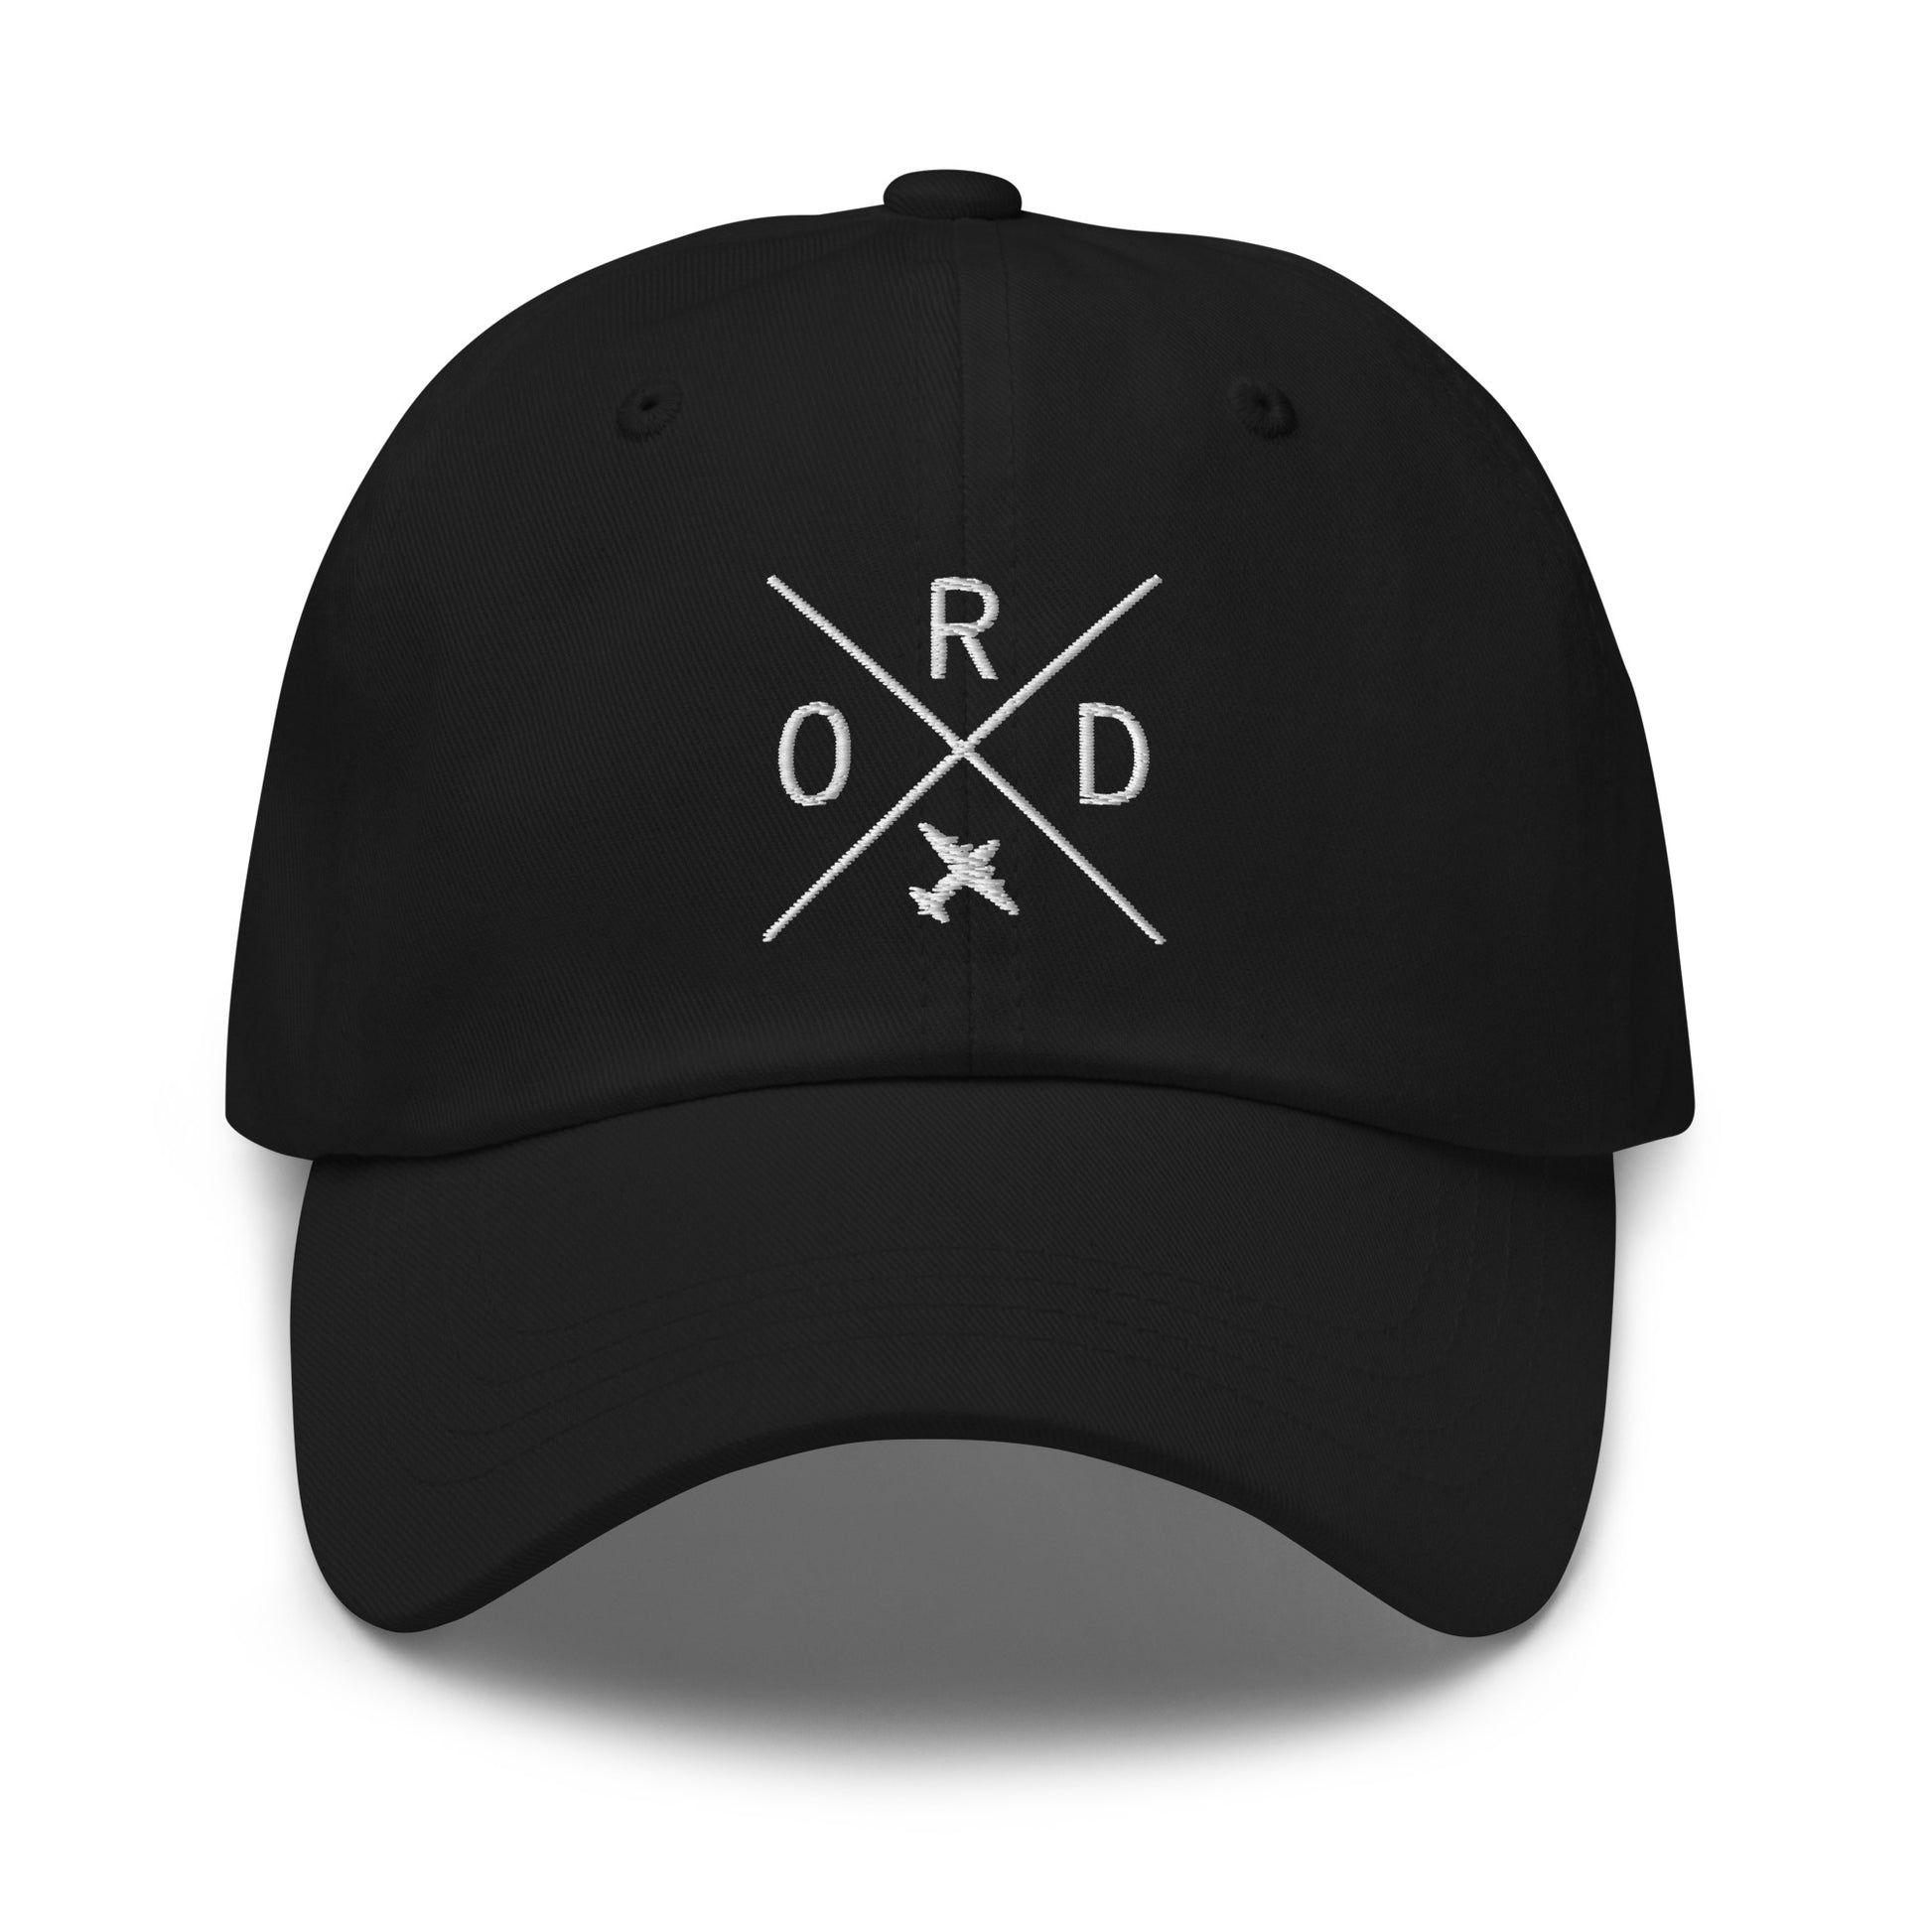 Crossed-X Dad Hat - White • ORD Chicago • YHM Designs - Image 14